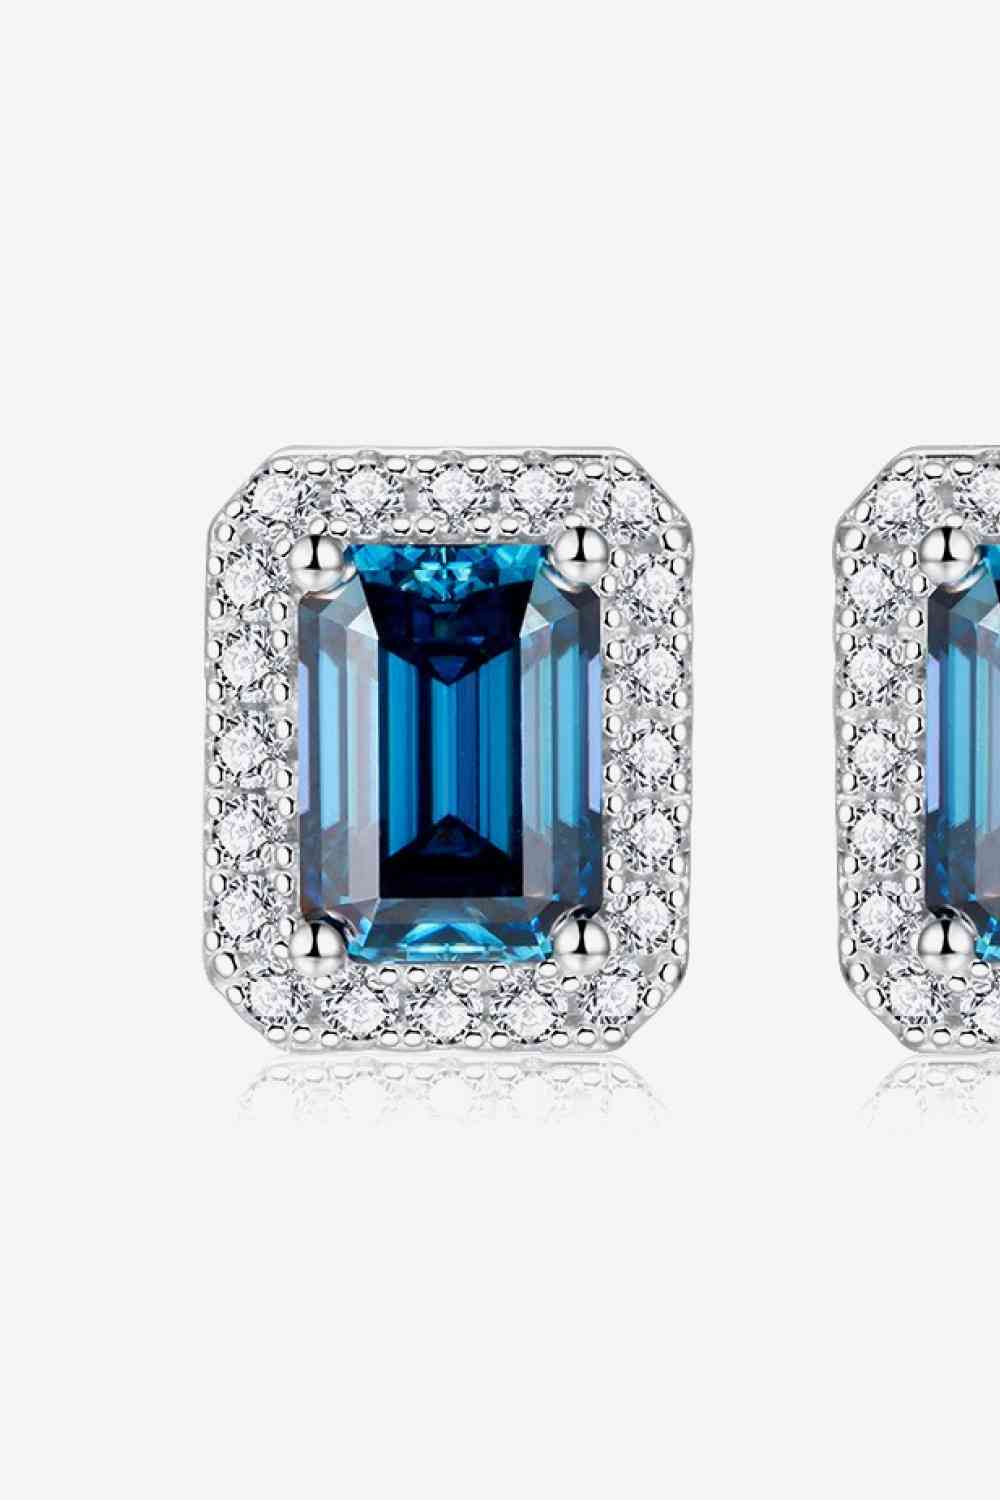 a pair of blue and white diamond earrings